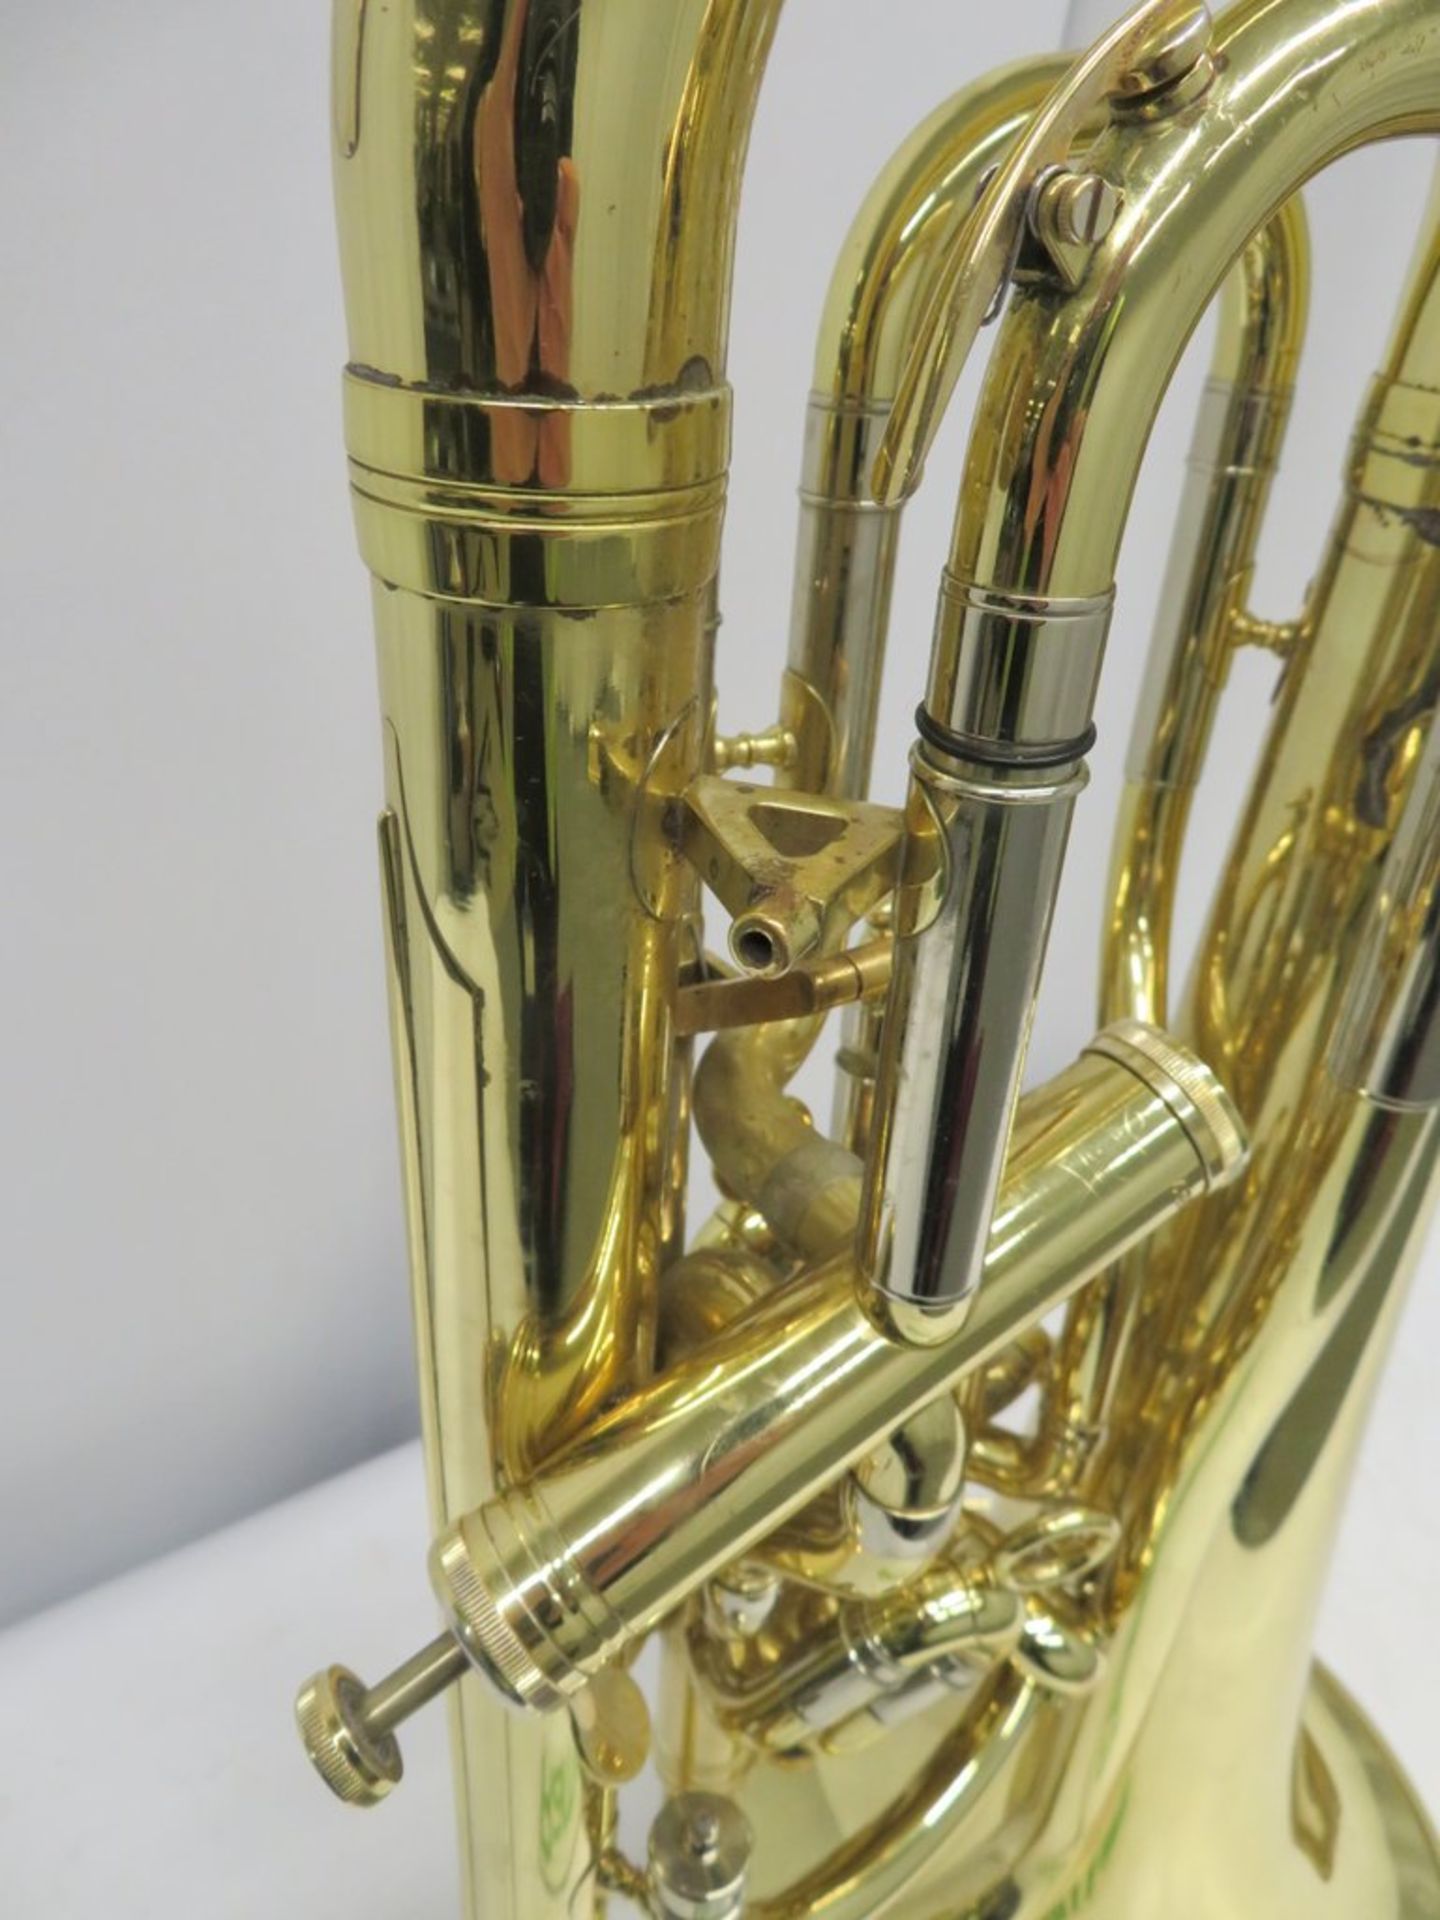 Besson Prestige BE2052 Euphonium With Case. Serial Number: 08300275. Please Note This Ite - Image 12 of 16